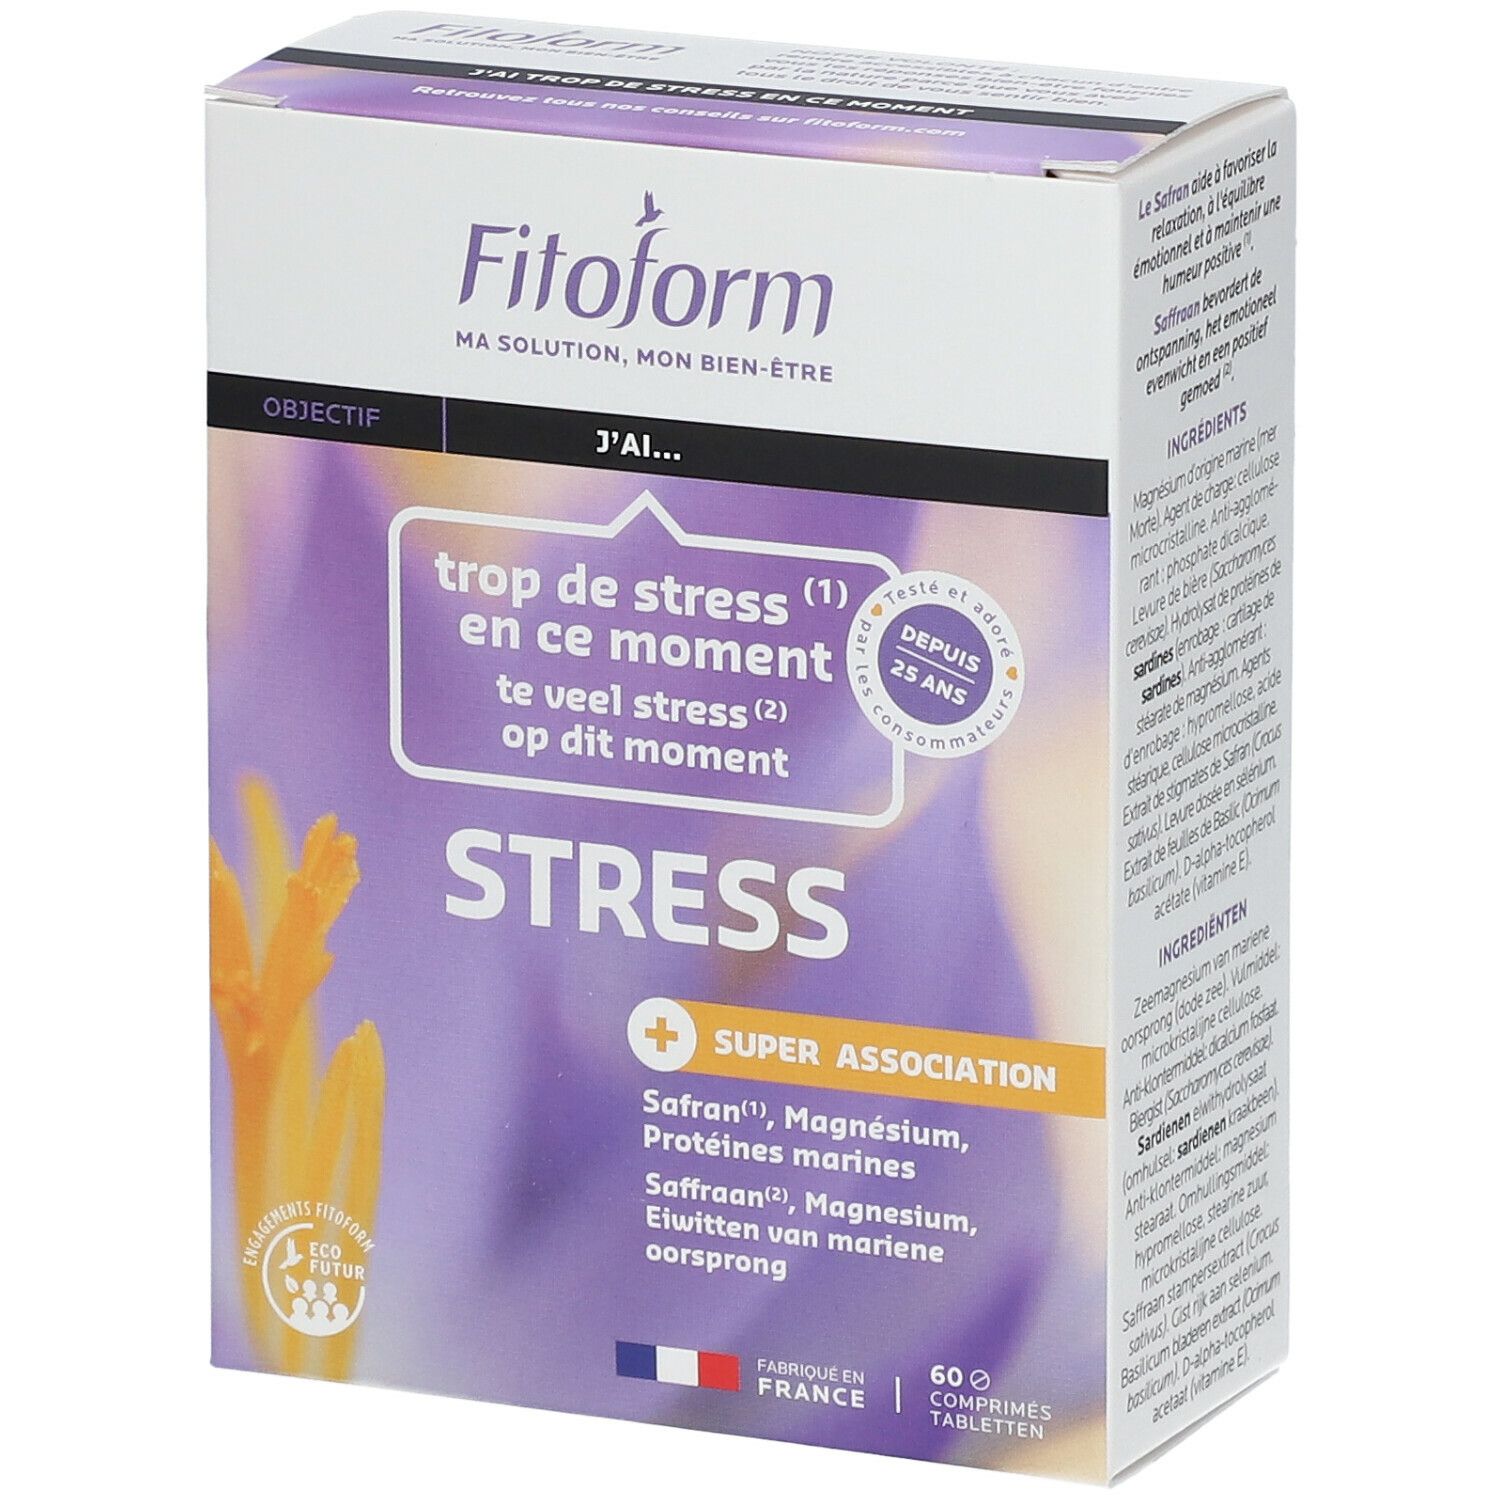 Image of Fitoform Stress